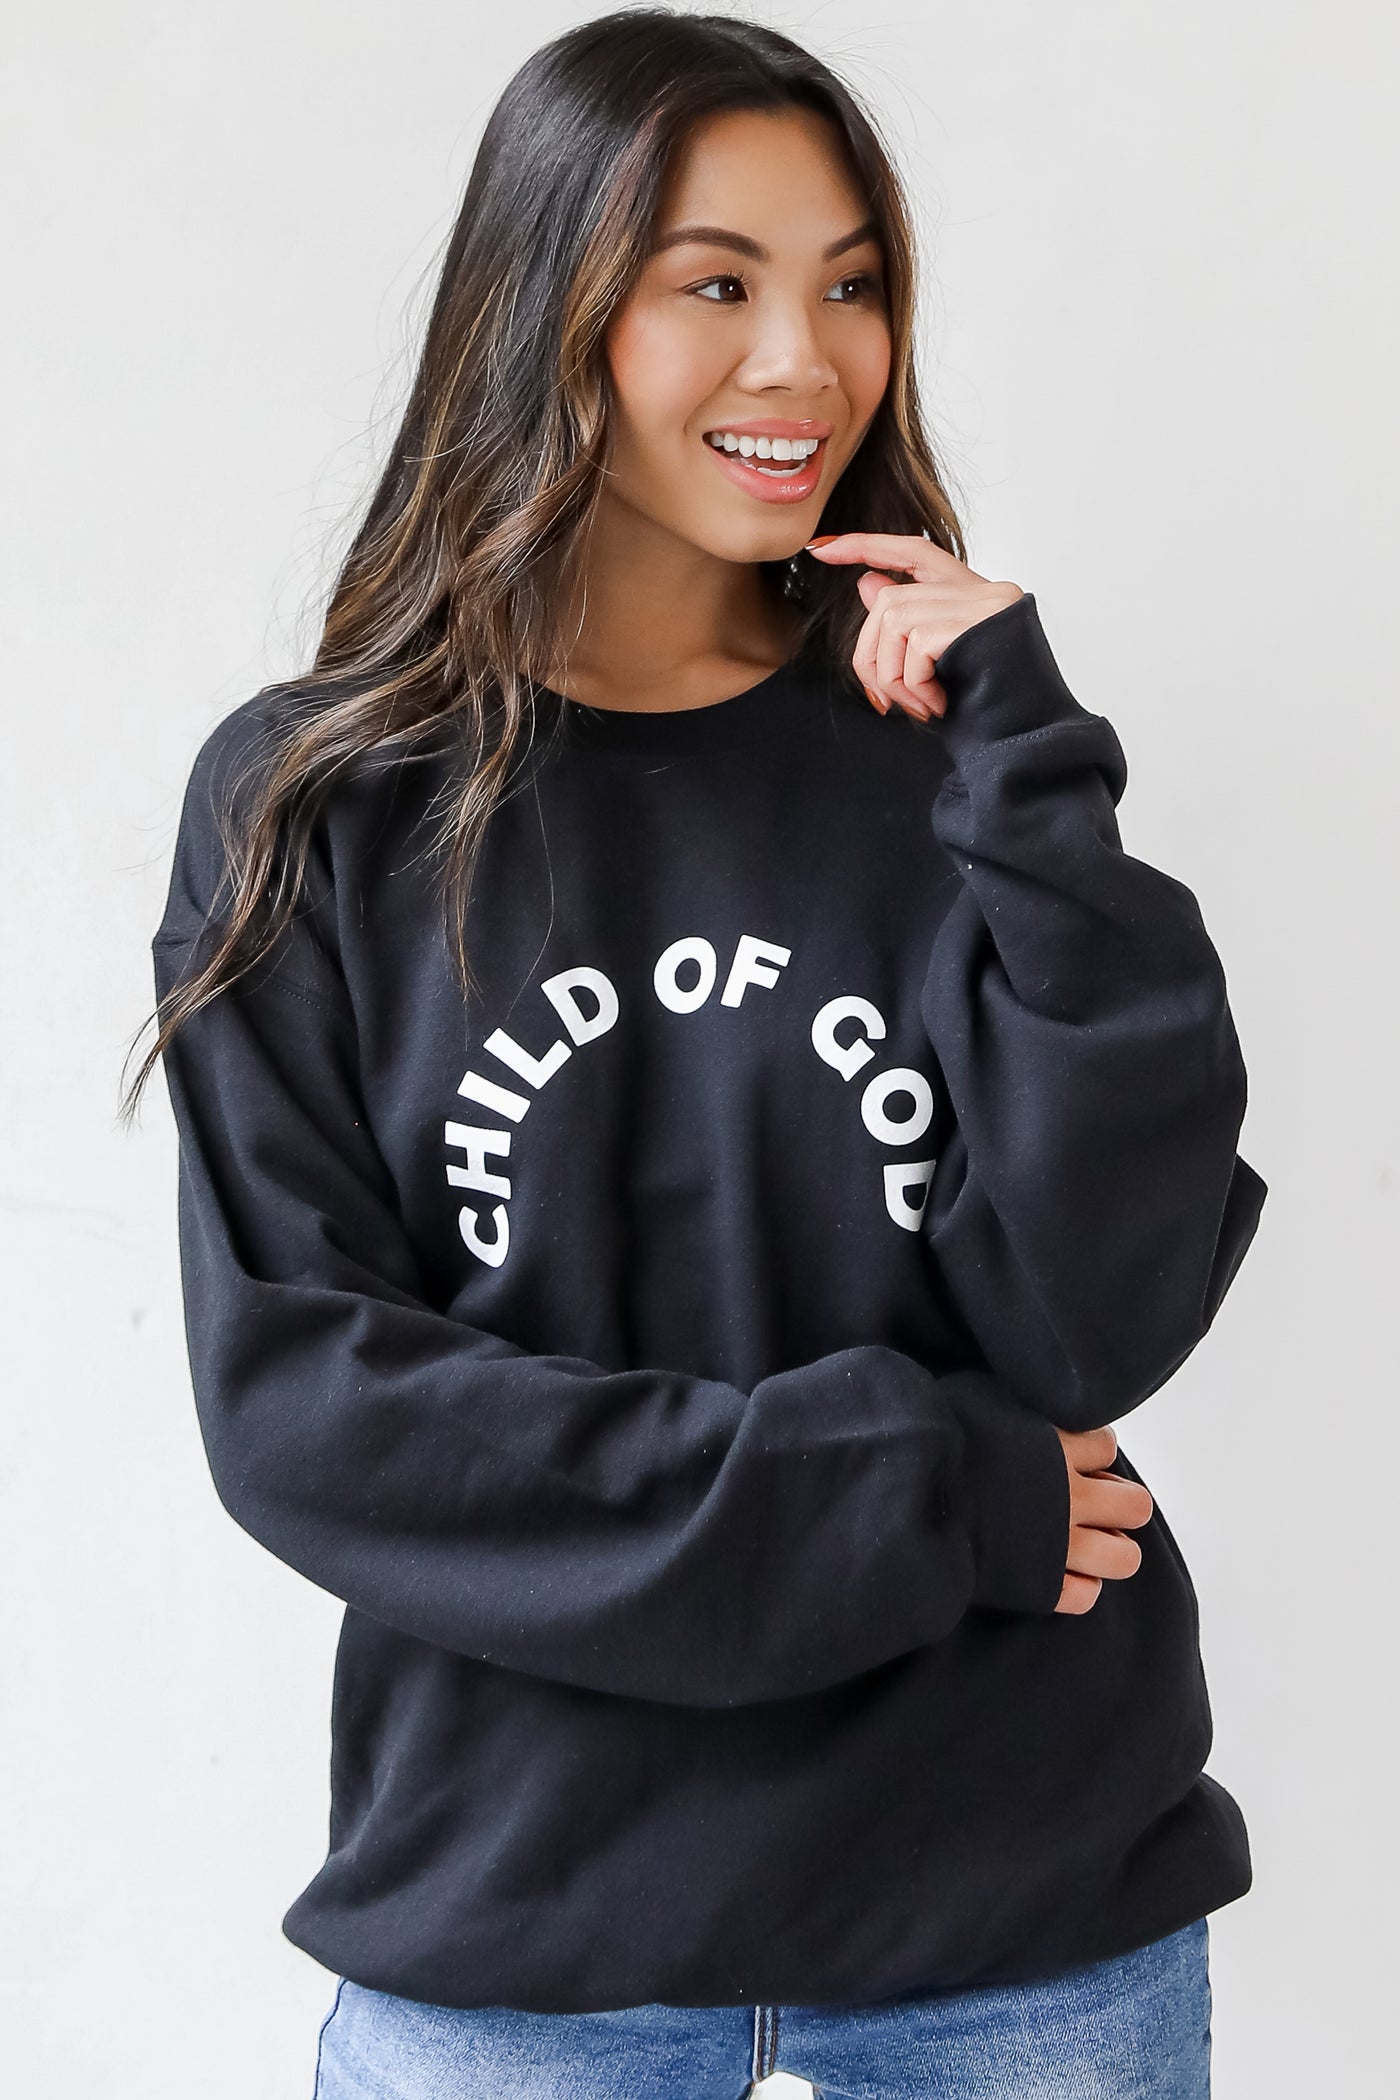 This comfy sweatshirt is designed with a soft and stretchy knit with a fleece interior. It features a crew neckline, long sleeves, a relaxed fit, and the words "Child Of God" on the front. 